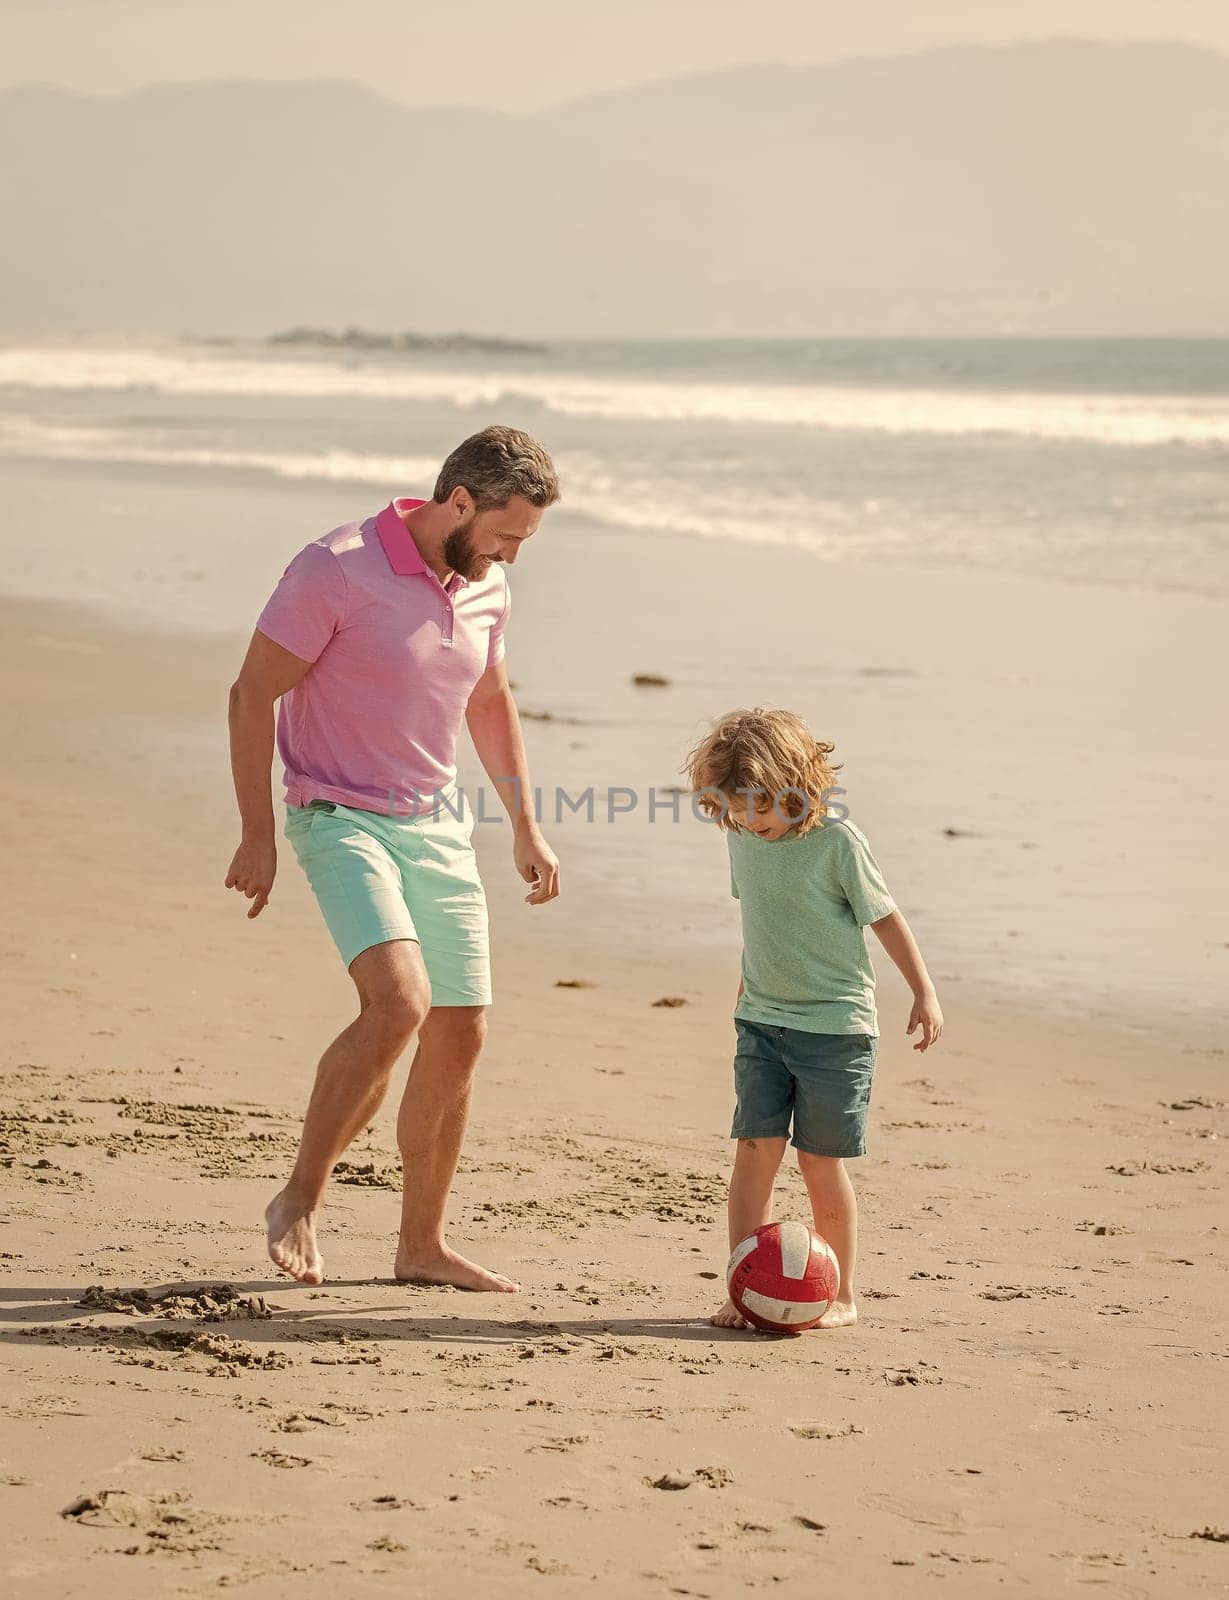 small kid and dad running on beach in summer vacation with ball, parenting.